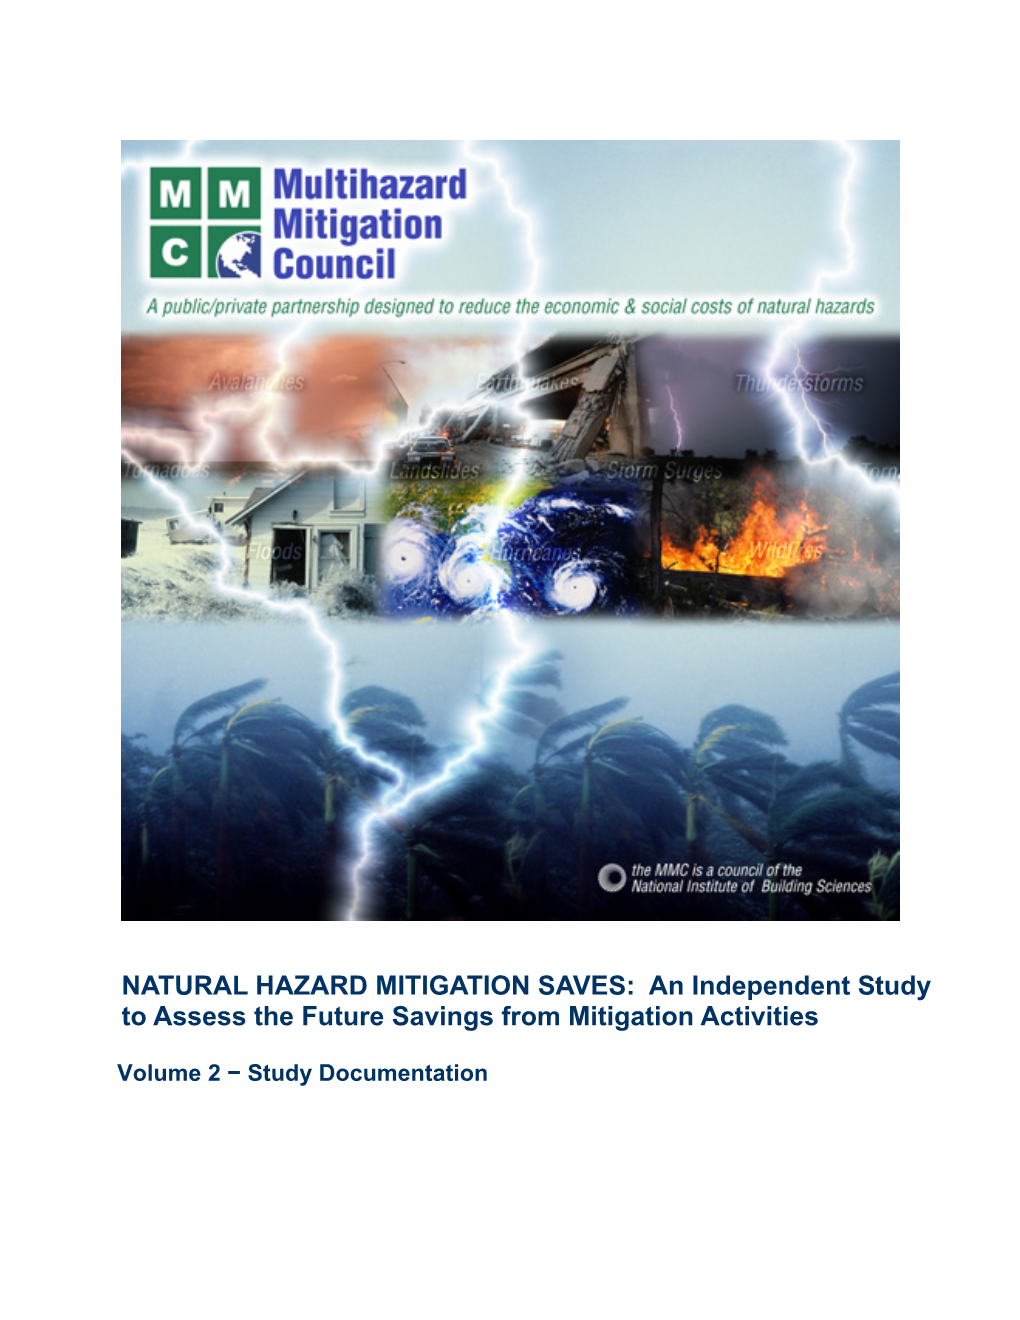 NATURAL HAZARD MITIGATION SAVES: an Independent Study to Assess the Future Savings from Mitigation Activities